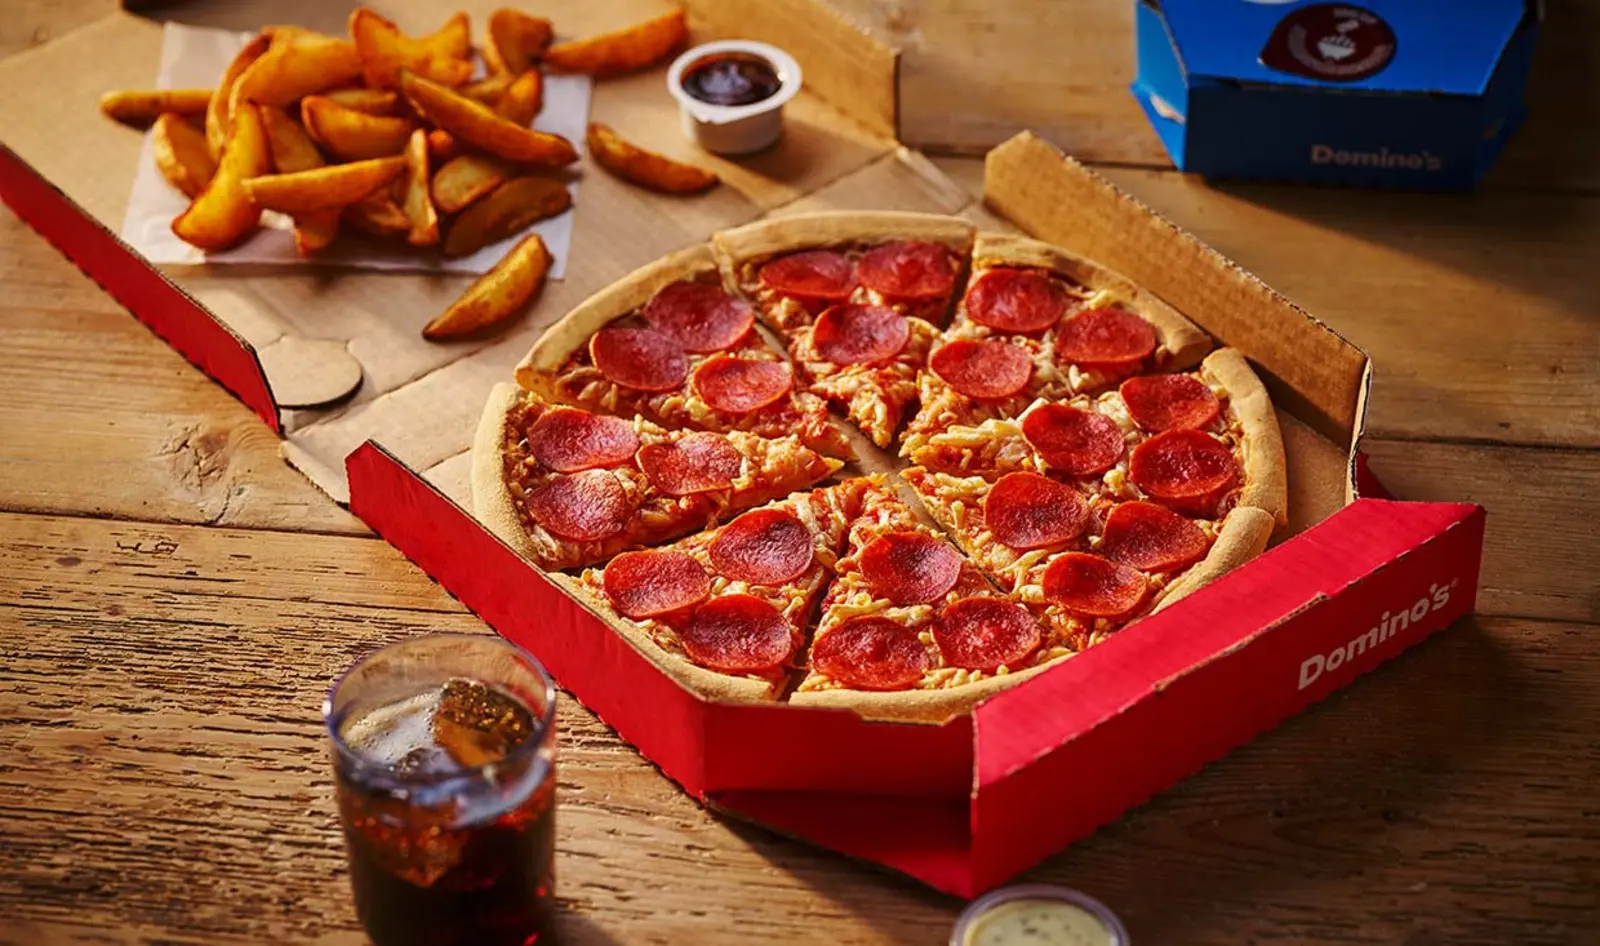 domino pizza uk - Is there dominoes in the UK